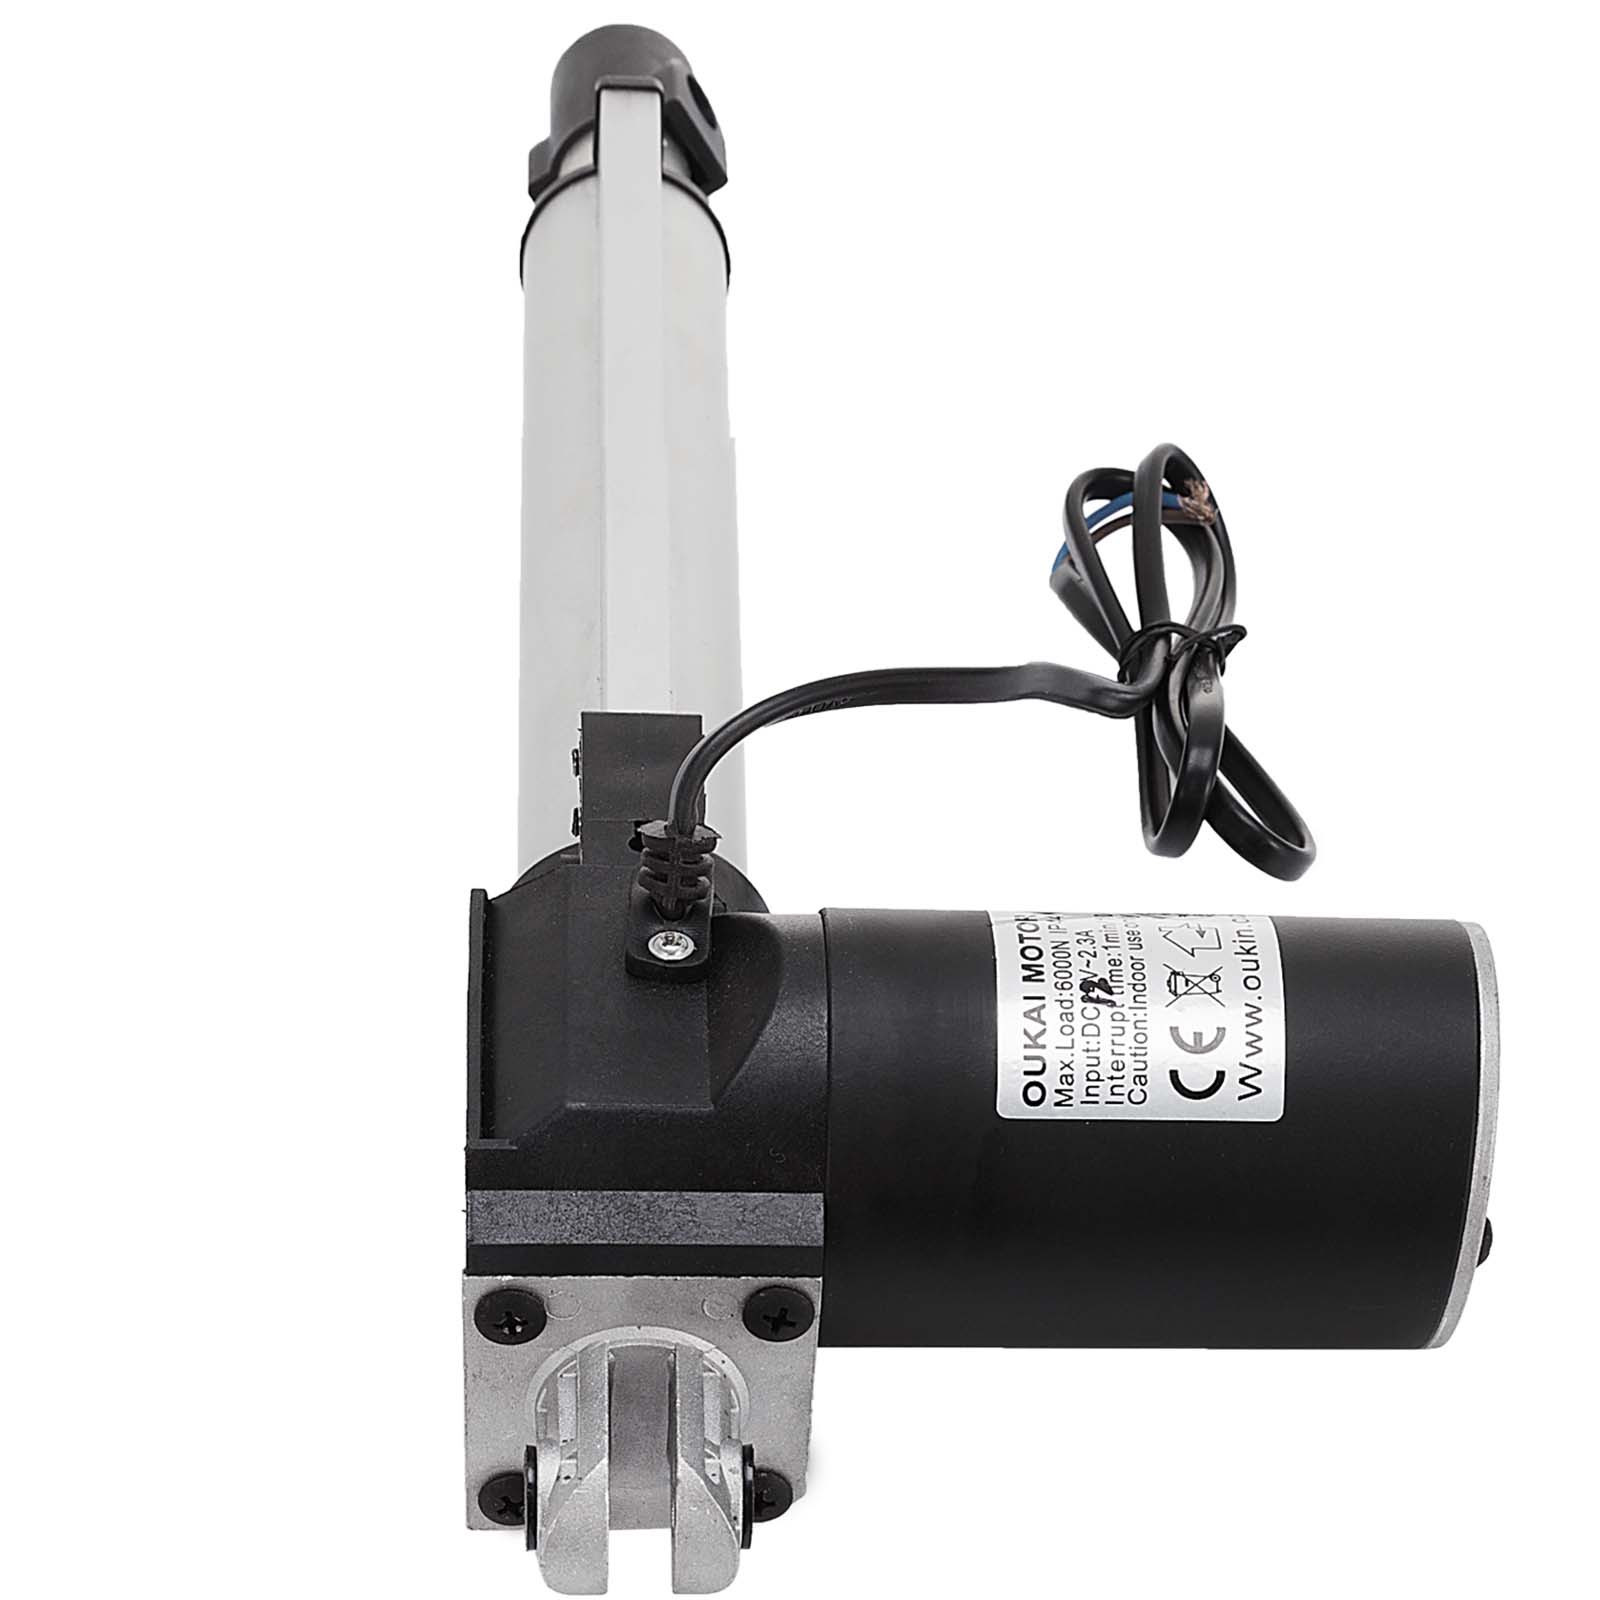 6000N Electric Linear Actuator 1320 Pound Max Lift Heavy Duty 12V DC Motor 